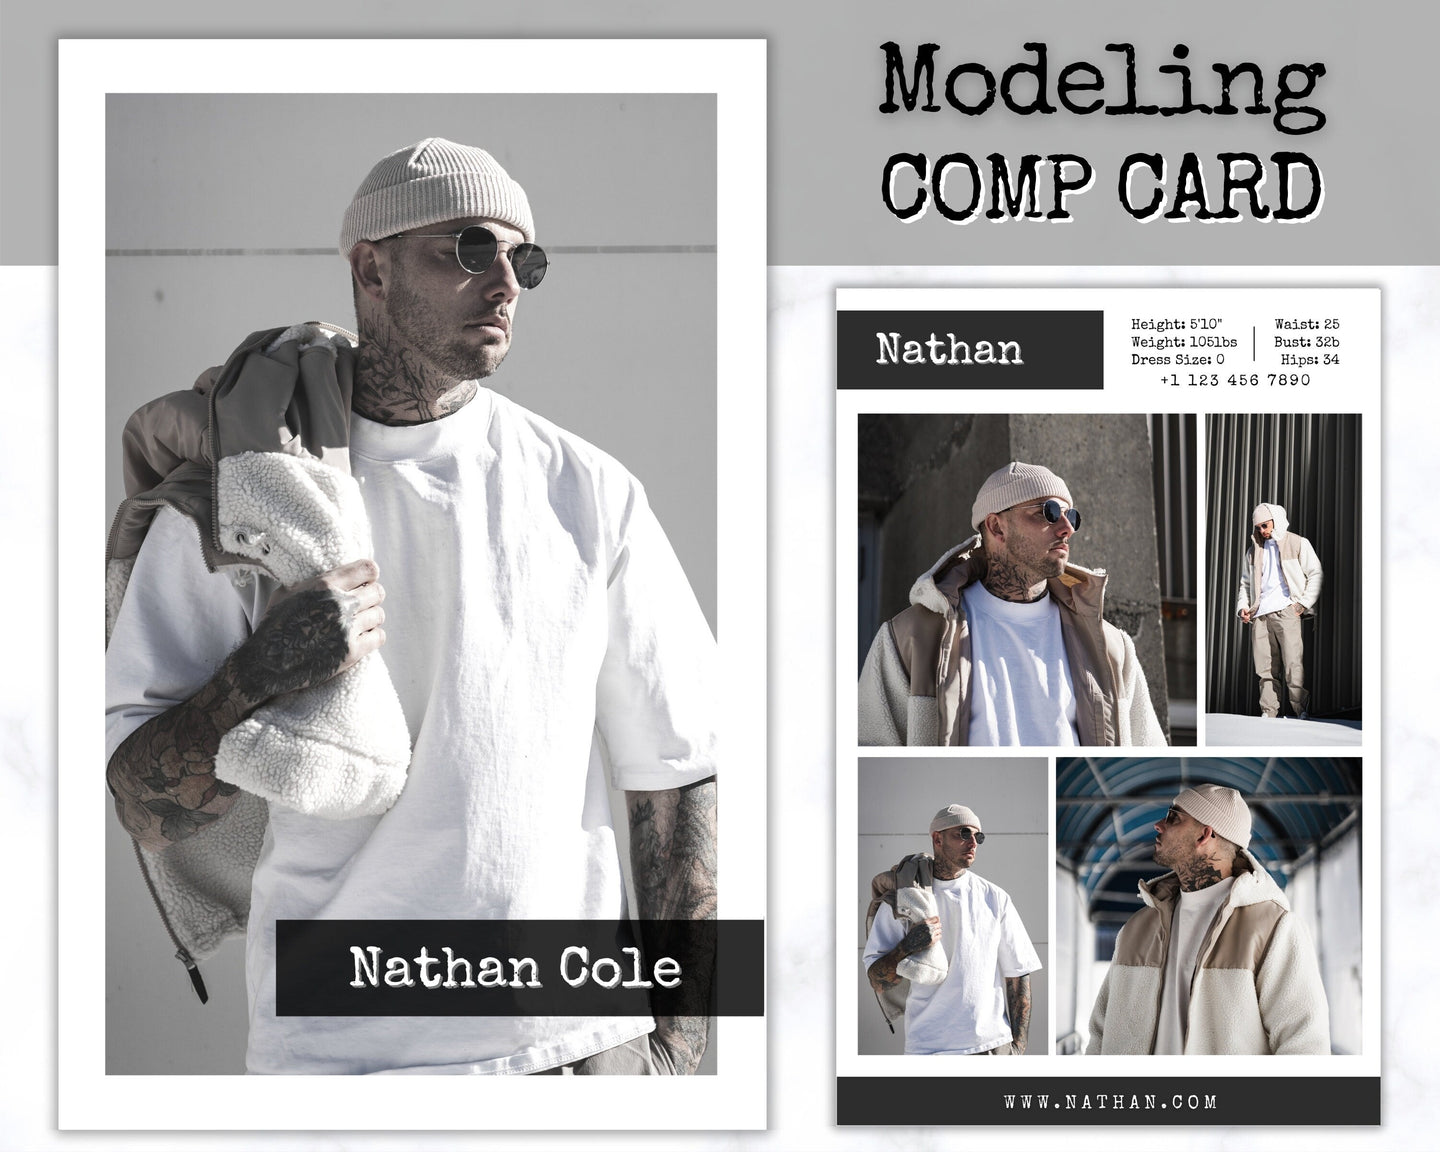 COMP CARD Template. Modeling Photocard! Zed Card for Models. Z Card. Fashion Resume Photo Card. Modeling Compcard Editable Canva Template | Style 2